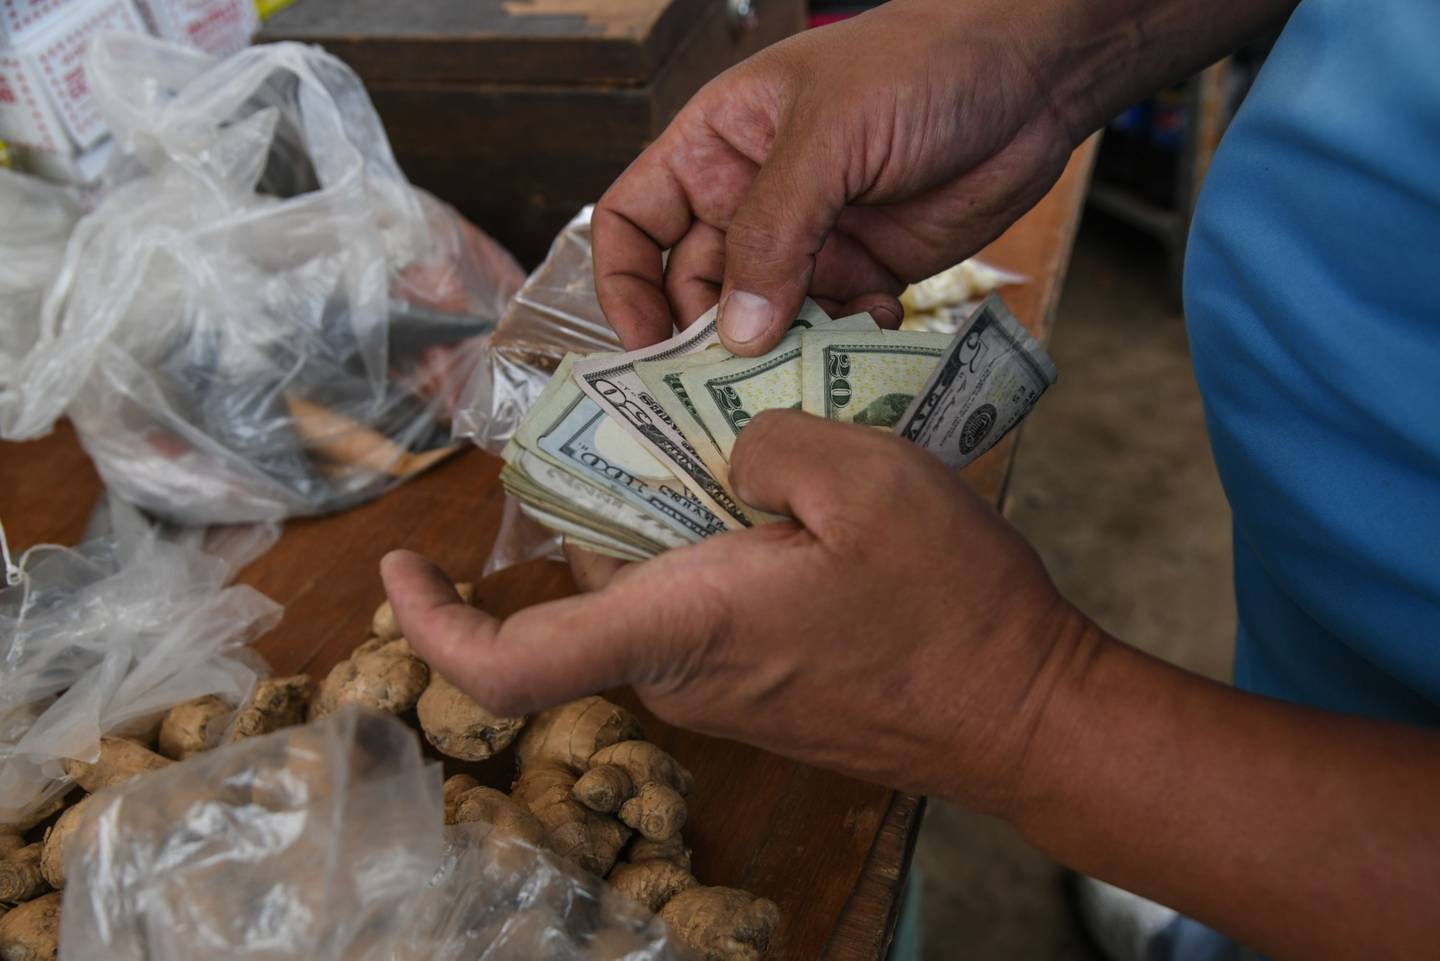 A vendor counts U.S. dollars at a market in Caracas, Venezuela, on Monday, Oct. 4, 2021. Venezuela is launching a new version of the bolivar in the latest attempt to salvage a currency so beaten down by years of hyperinflation that residents have adopted the U.S. dollar.